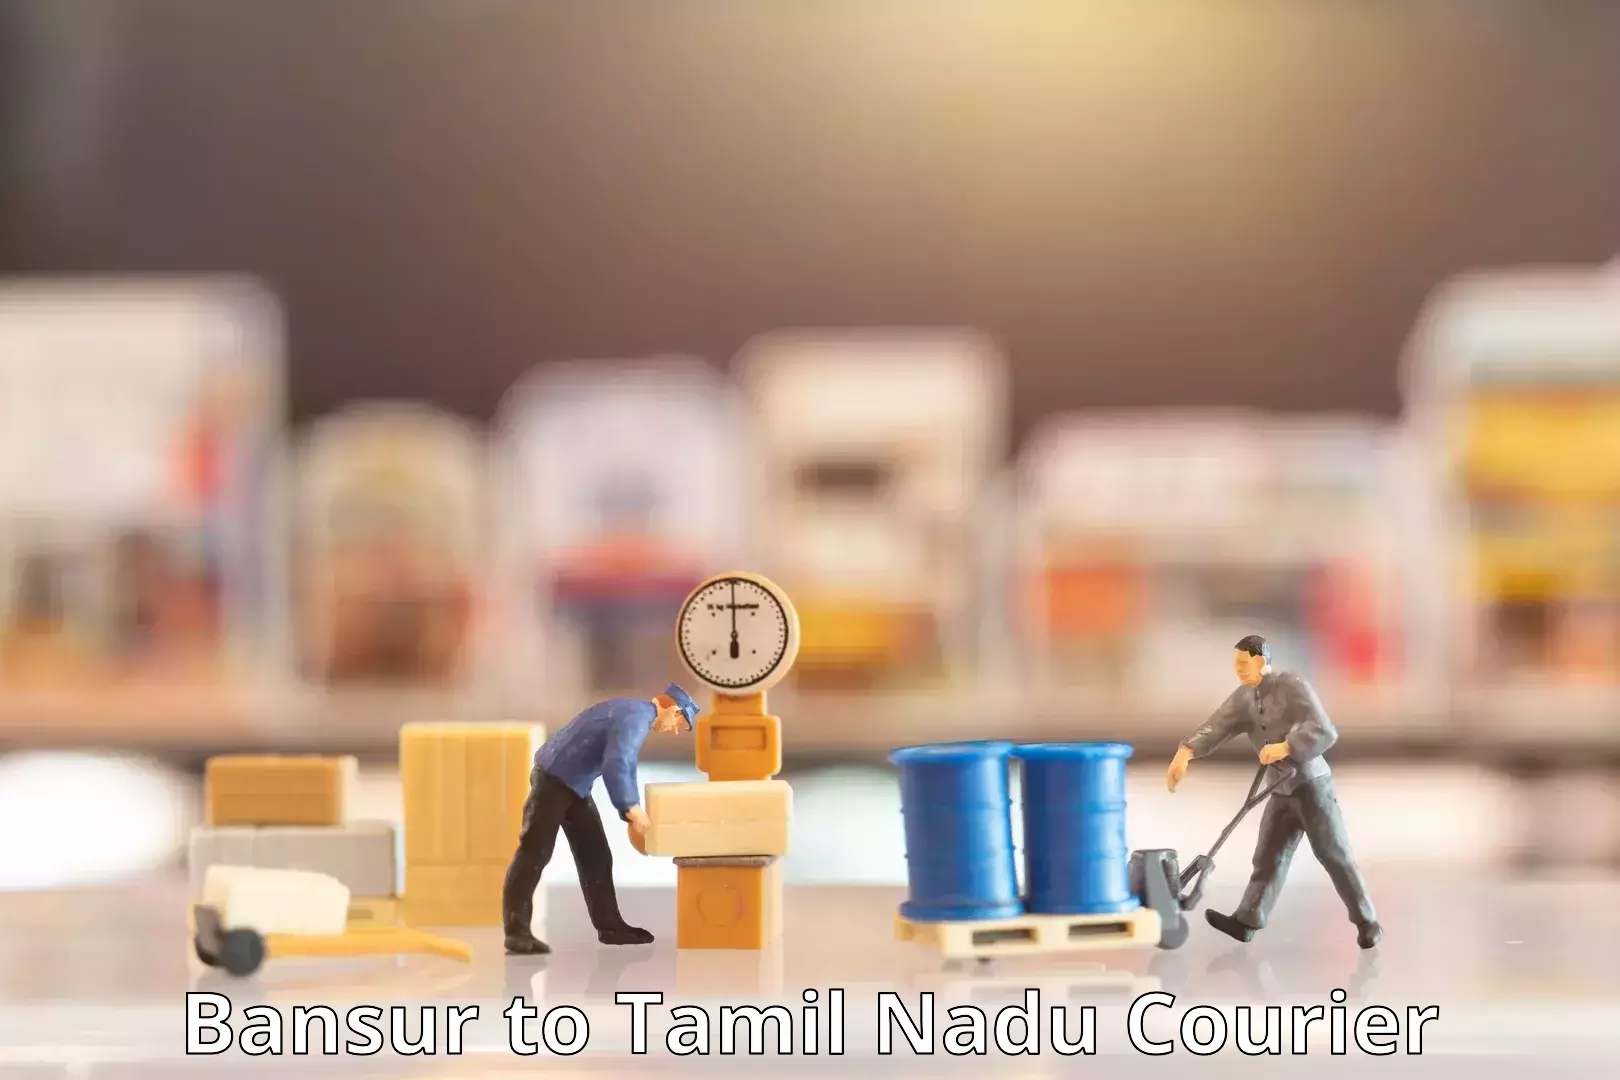 State-of-the-art courier technology Bansur to Tamil Nadu